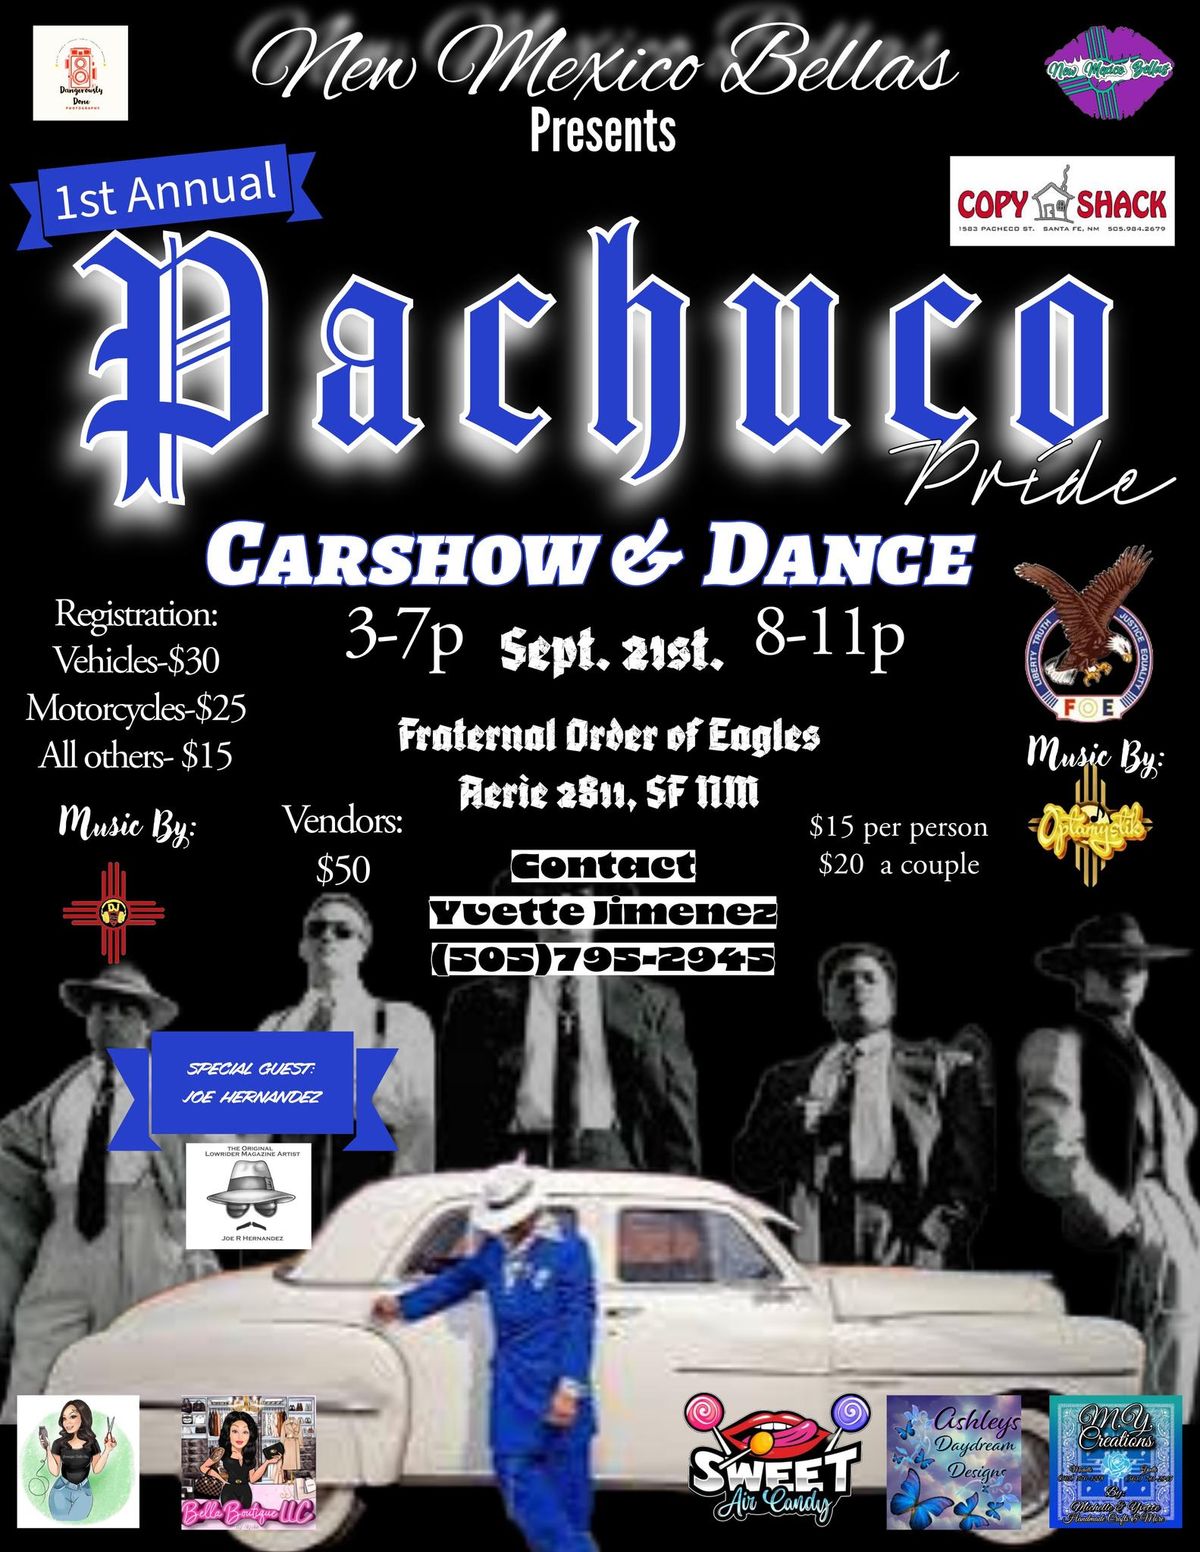 New Mexico Bellas 1st Annual Pachuco Pride Carshow & Dance